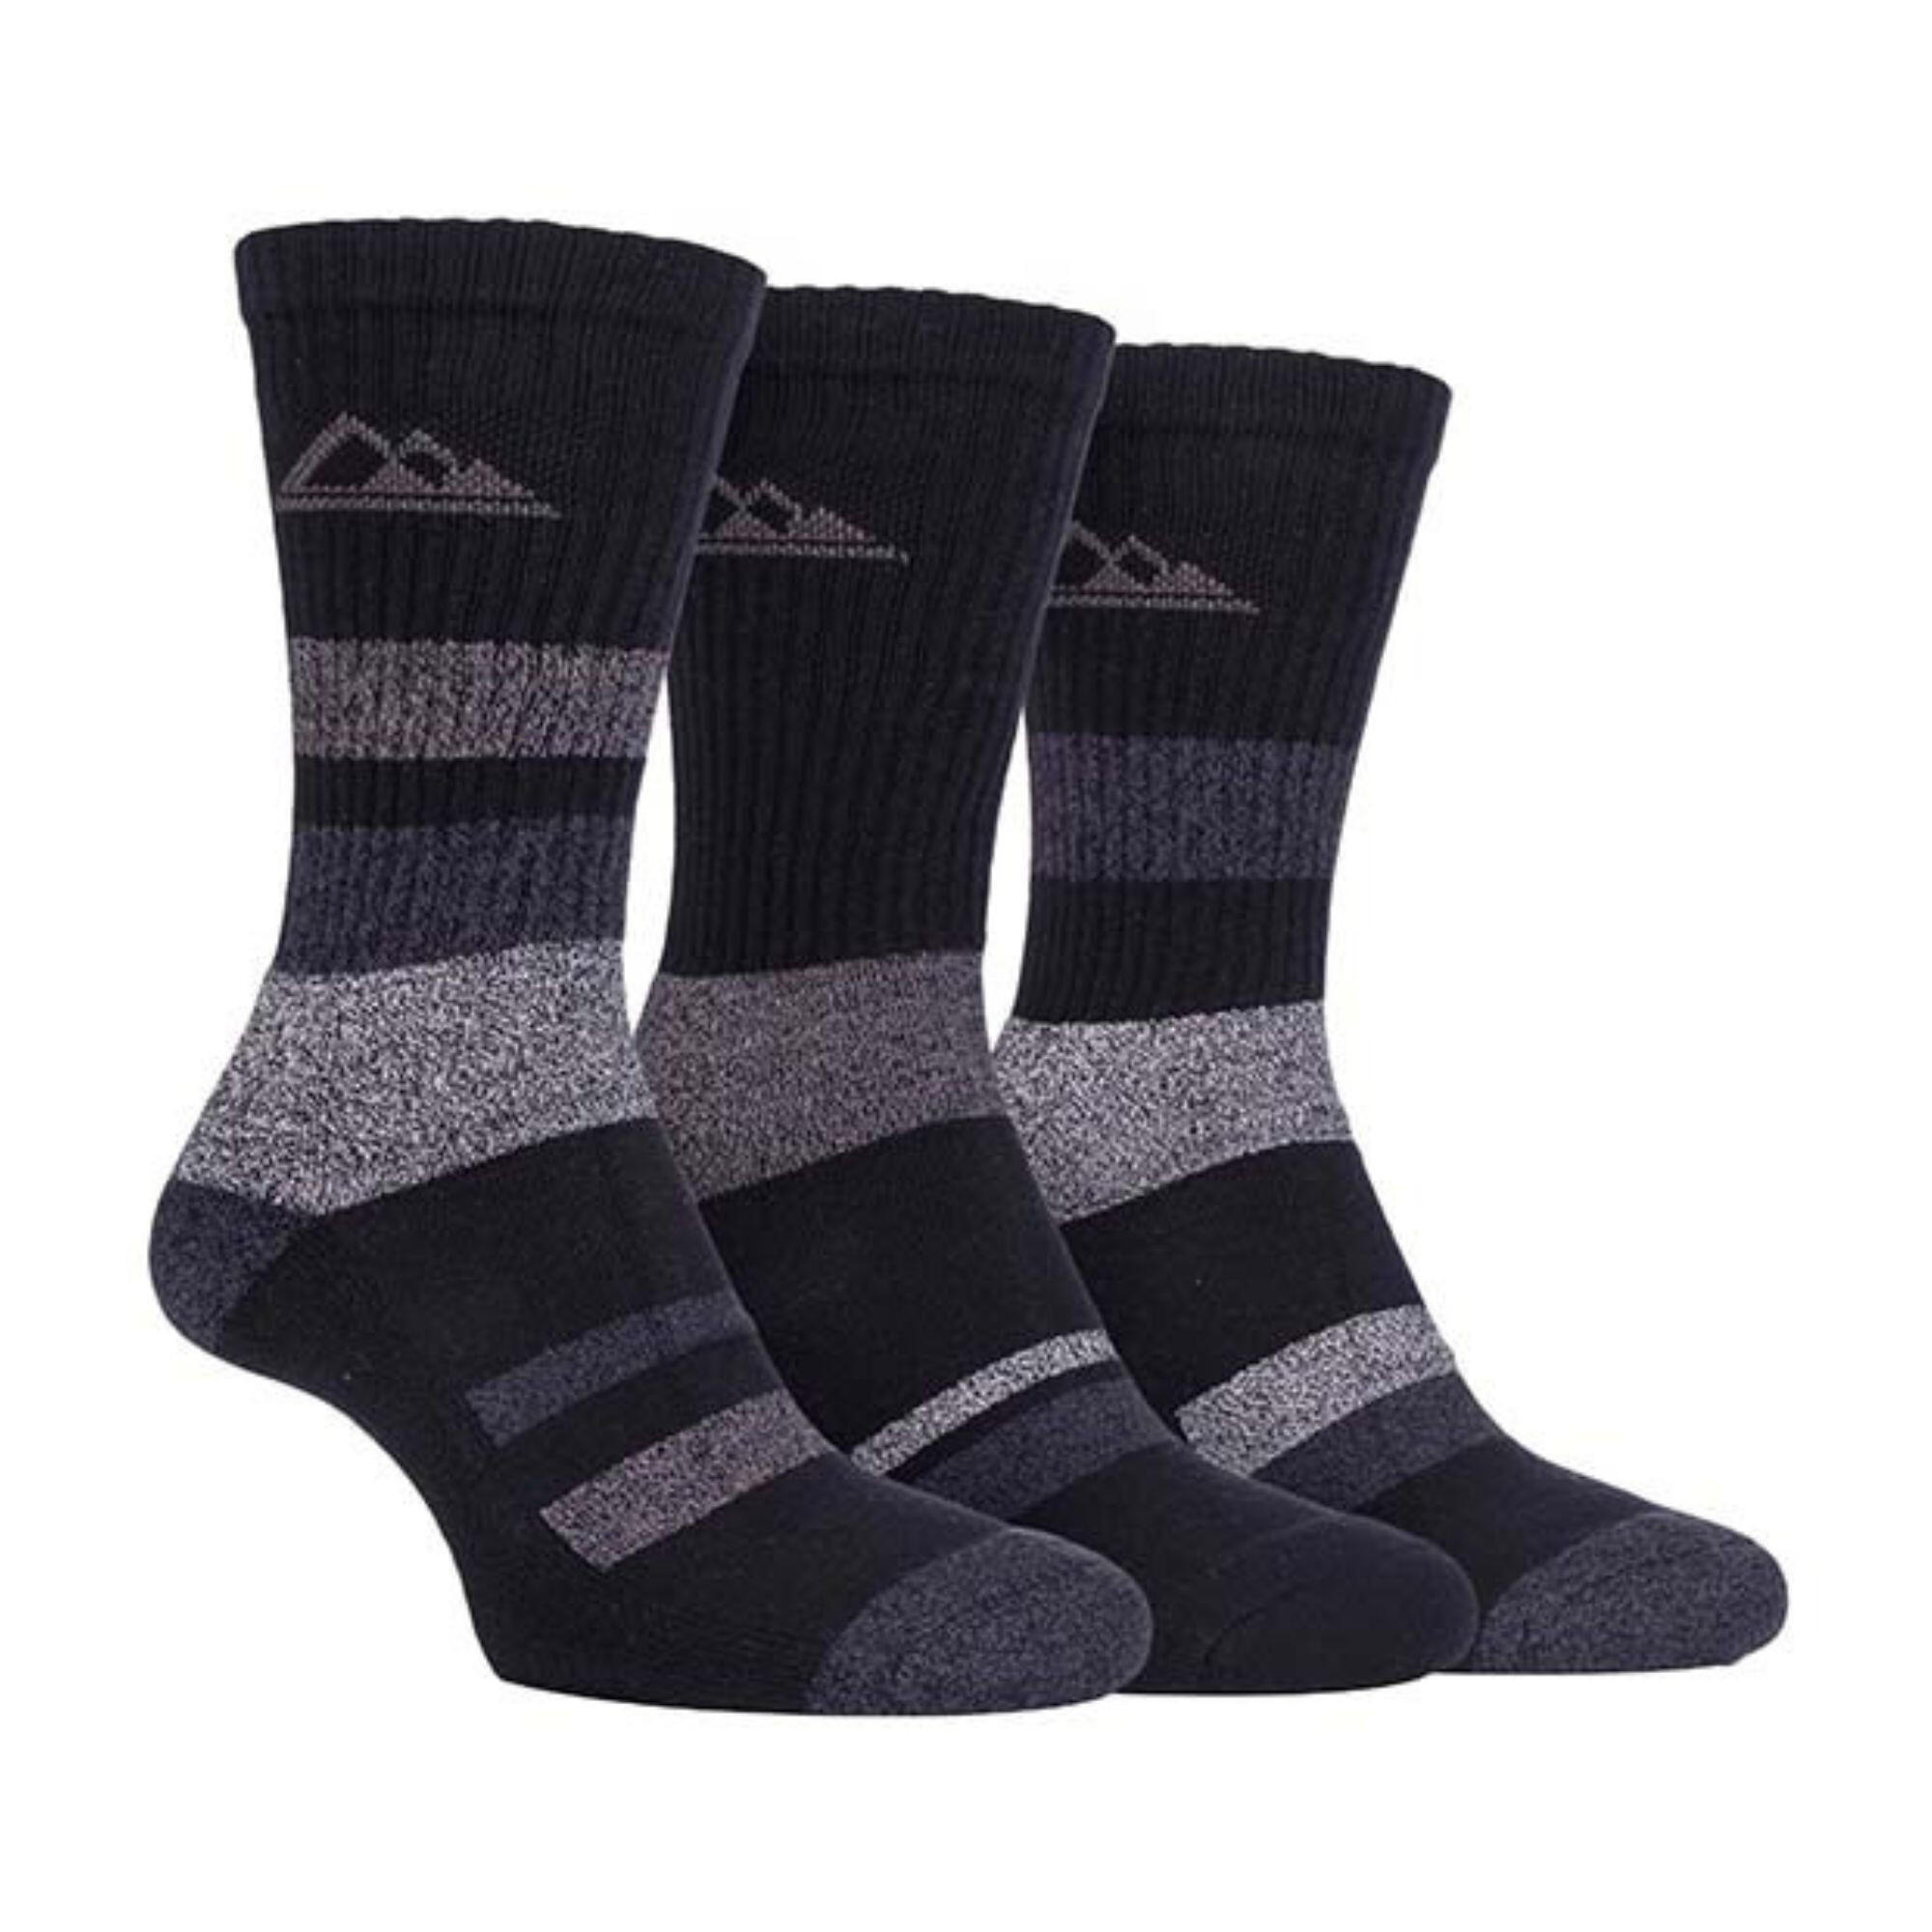 3 Pairs Ladies Anti Blister Cotton Hiking Socks with Padded Sole 1/6